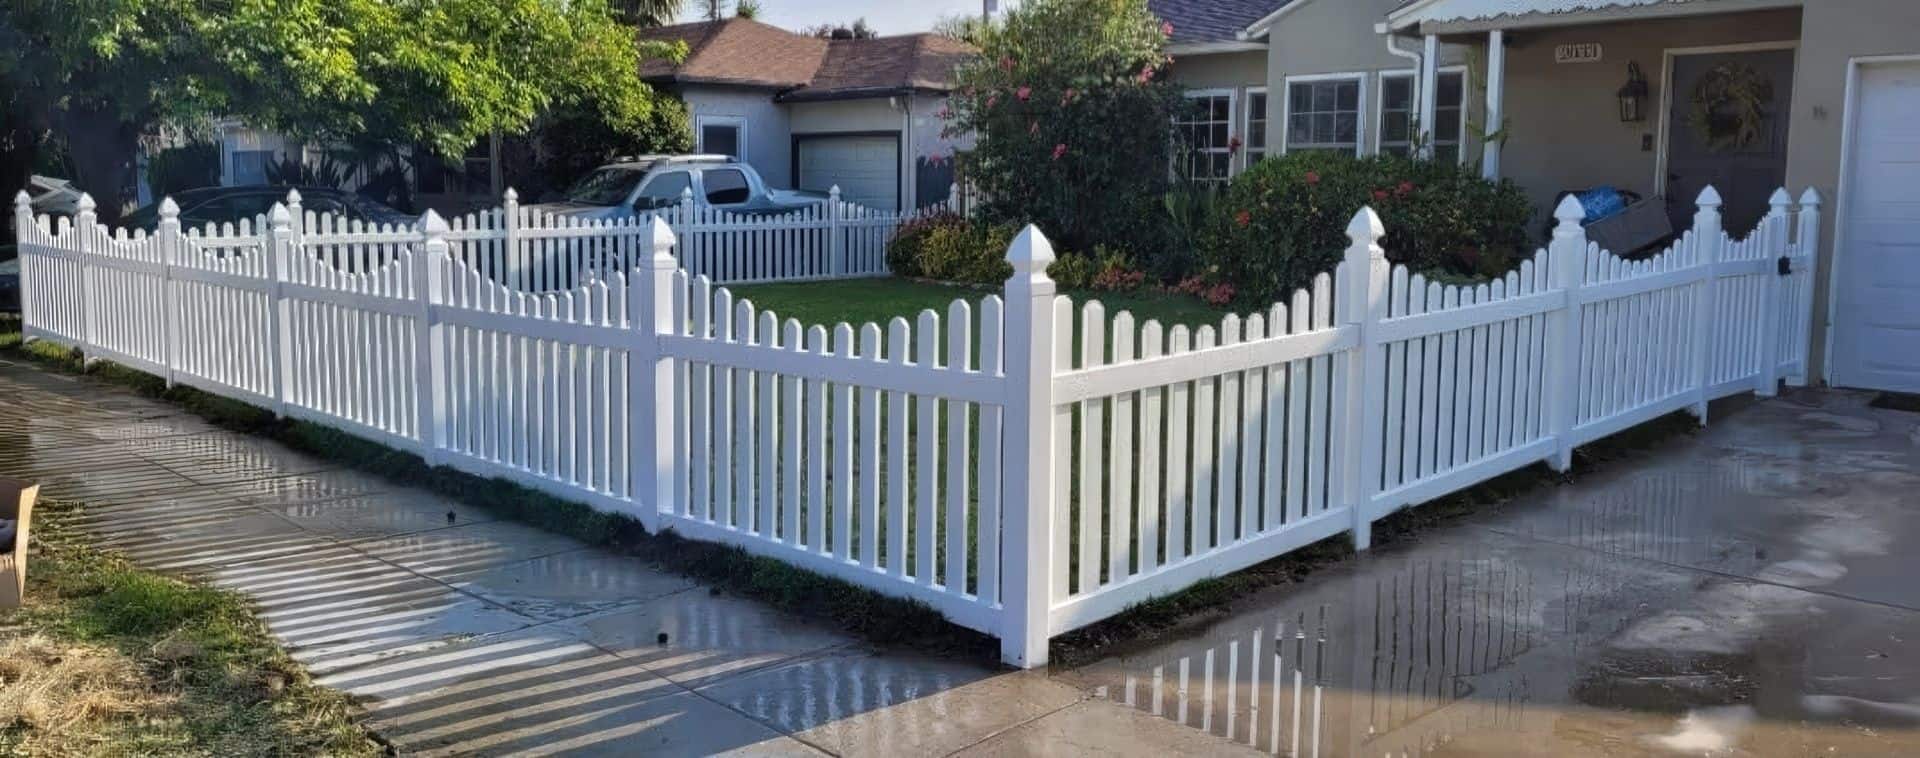 Vinyl scalloped picket fence surrounding the front lawn and entrance of cozy suburban home with a small garden